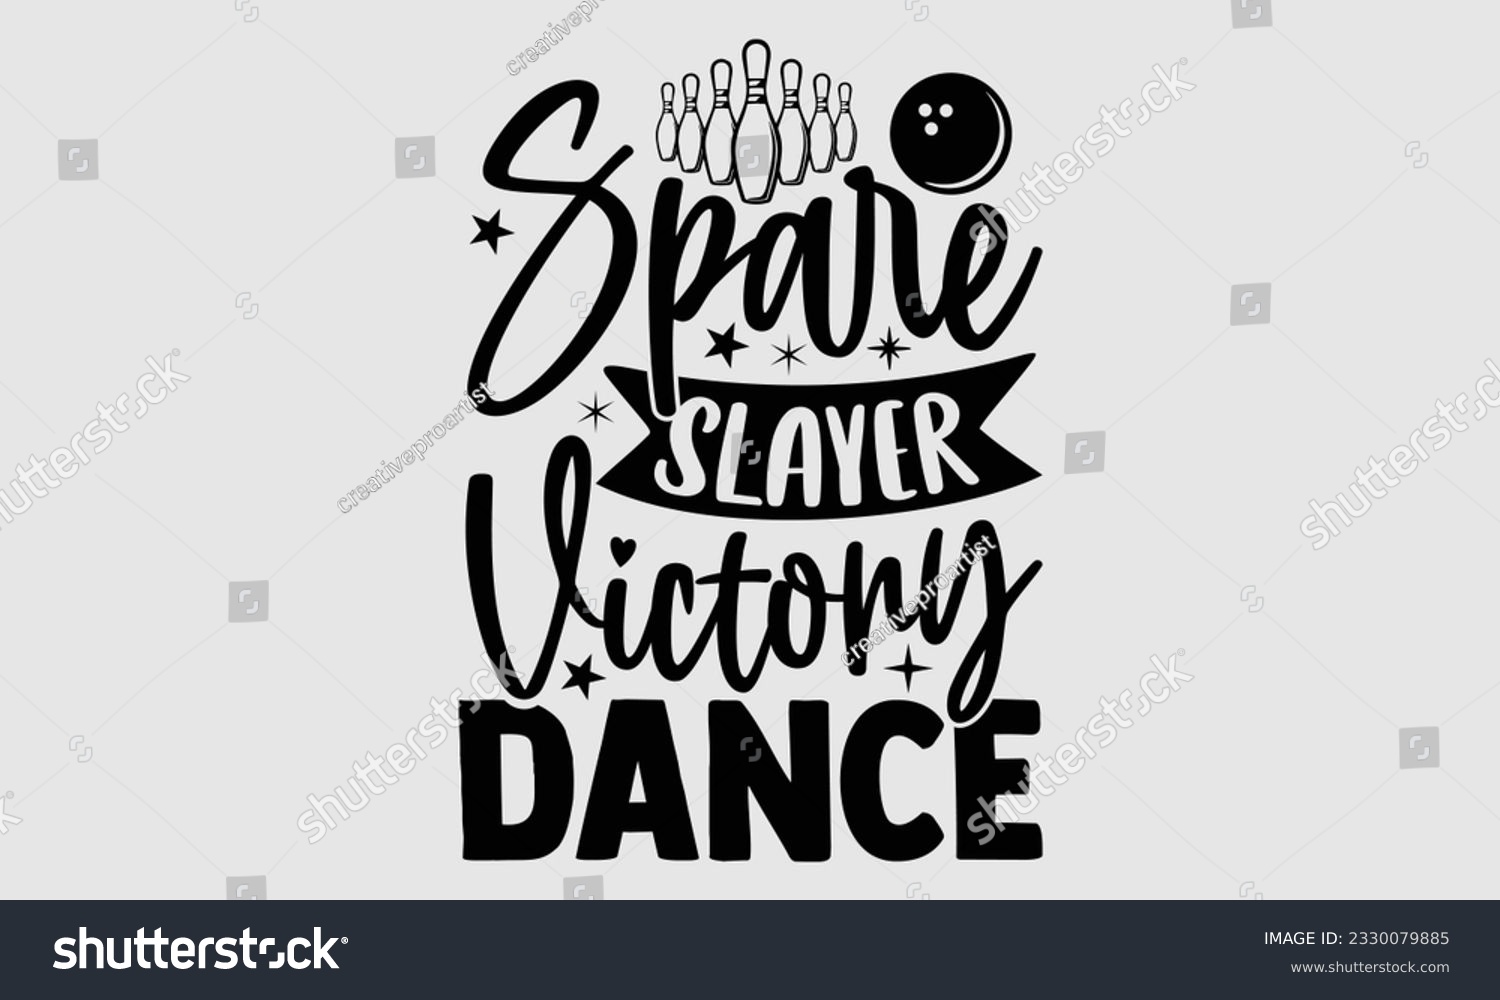 SVG of Spare Slayer Victory Dance- Bowling t-shirt design, Handmade calligraphy vector Illustration for prints on SVG and bags, posters, greeting card template EPS svg